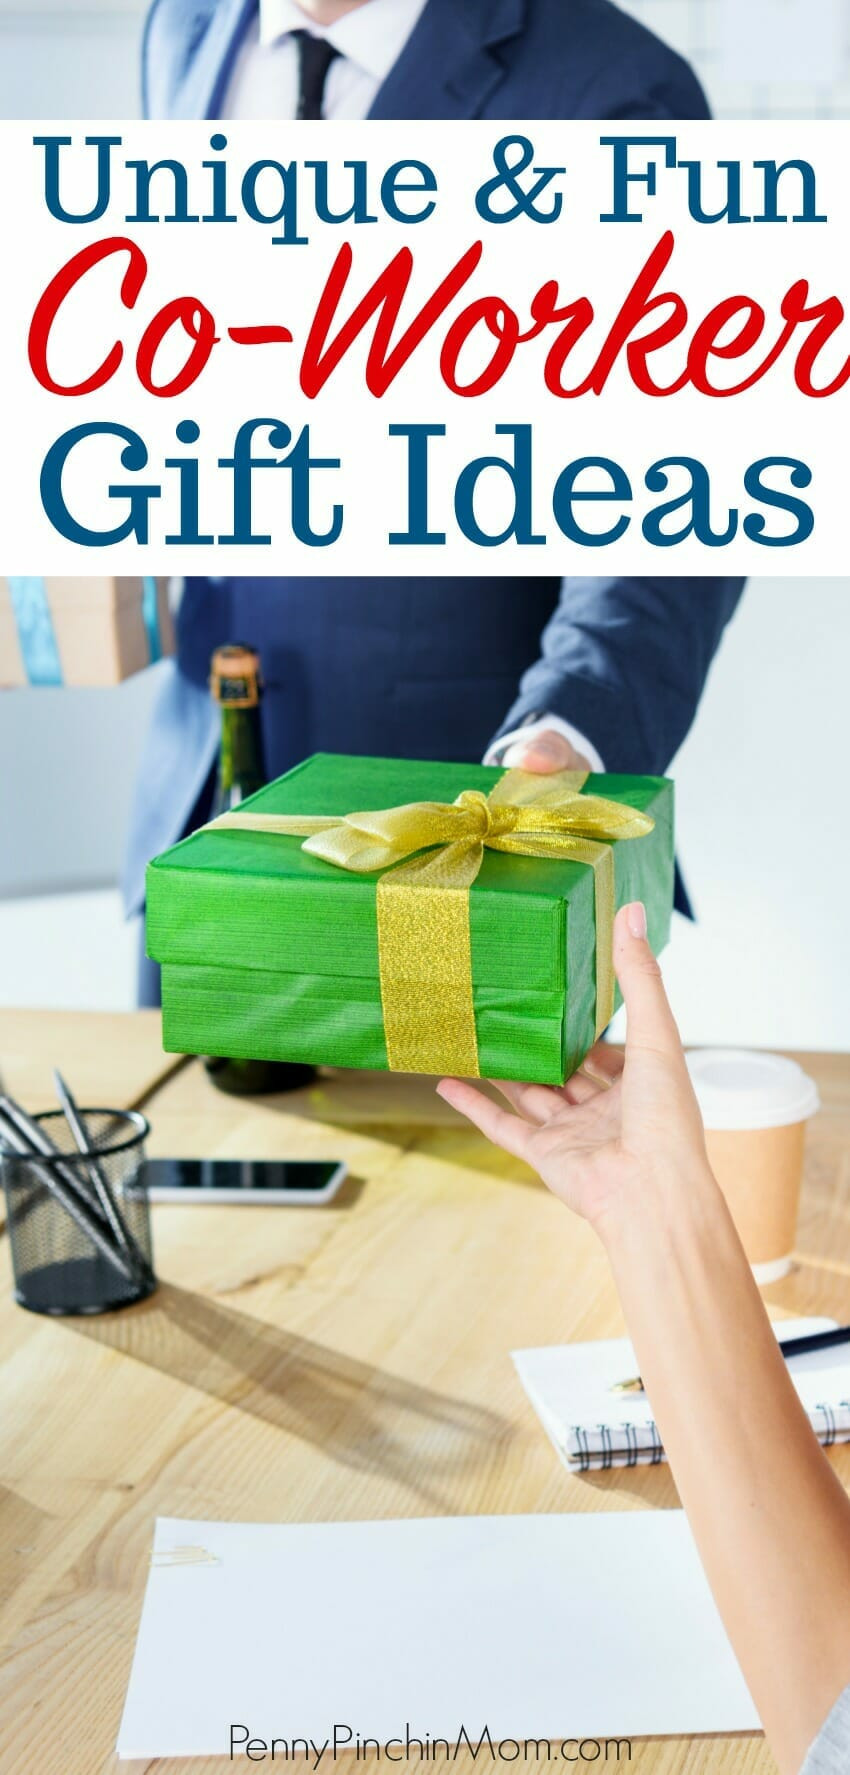 Christmas Gift Ideas For Female Coworkers Best Of Co Worker Gift Ideas For Anyone On Your List This Year Of Christmas Gift Ideas For Female Coworkers 